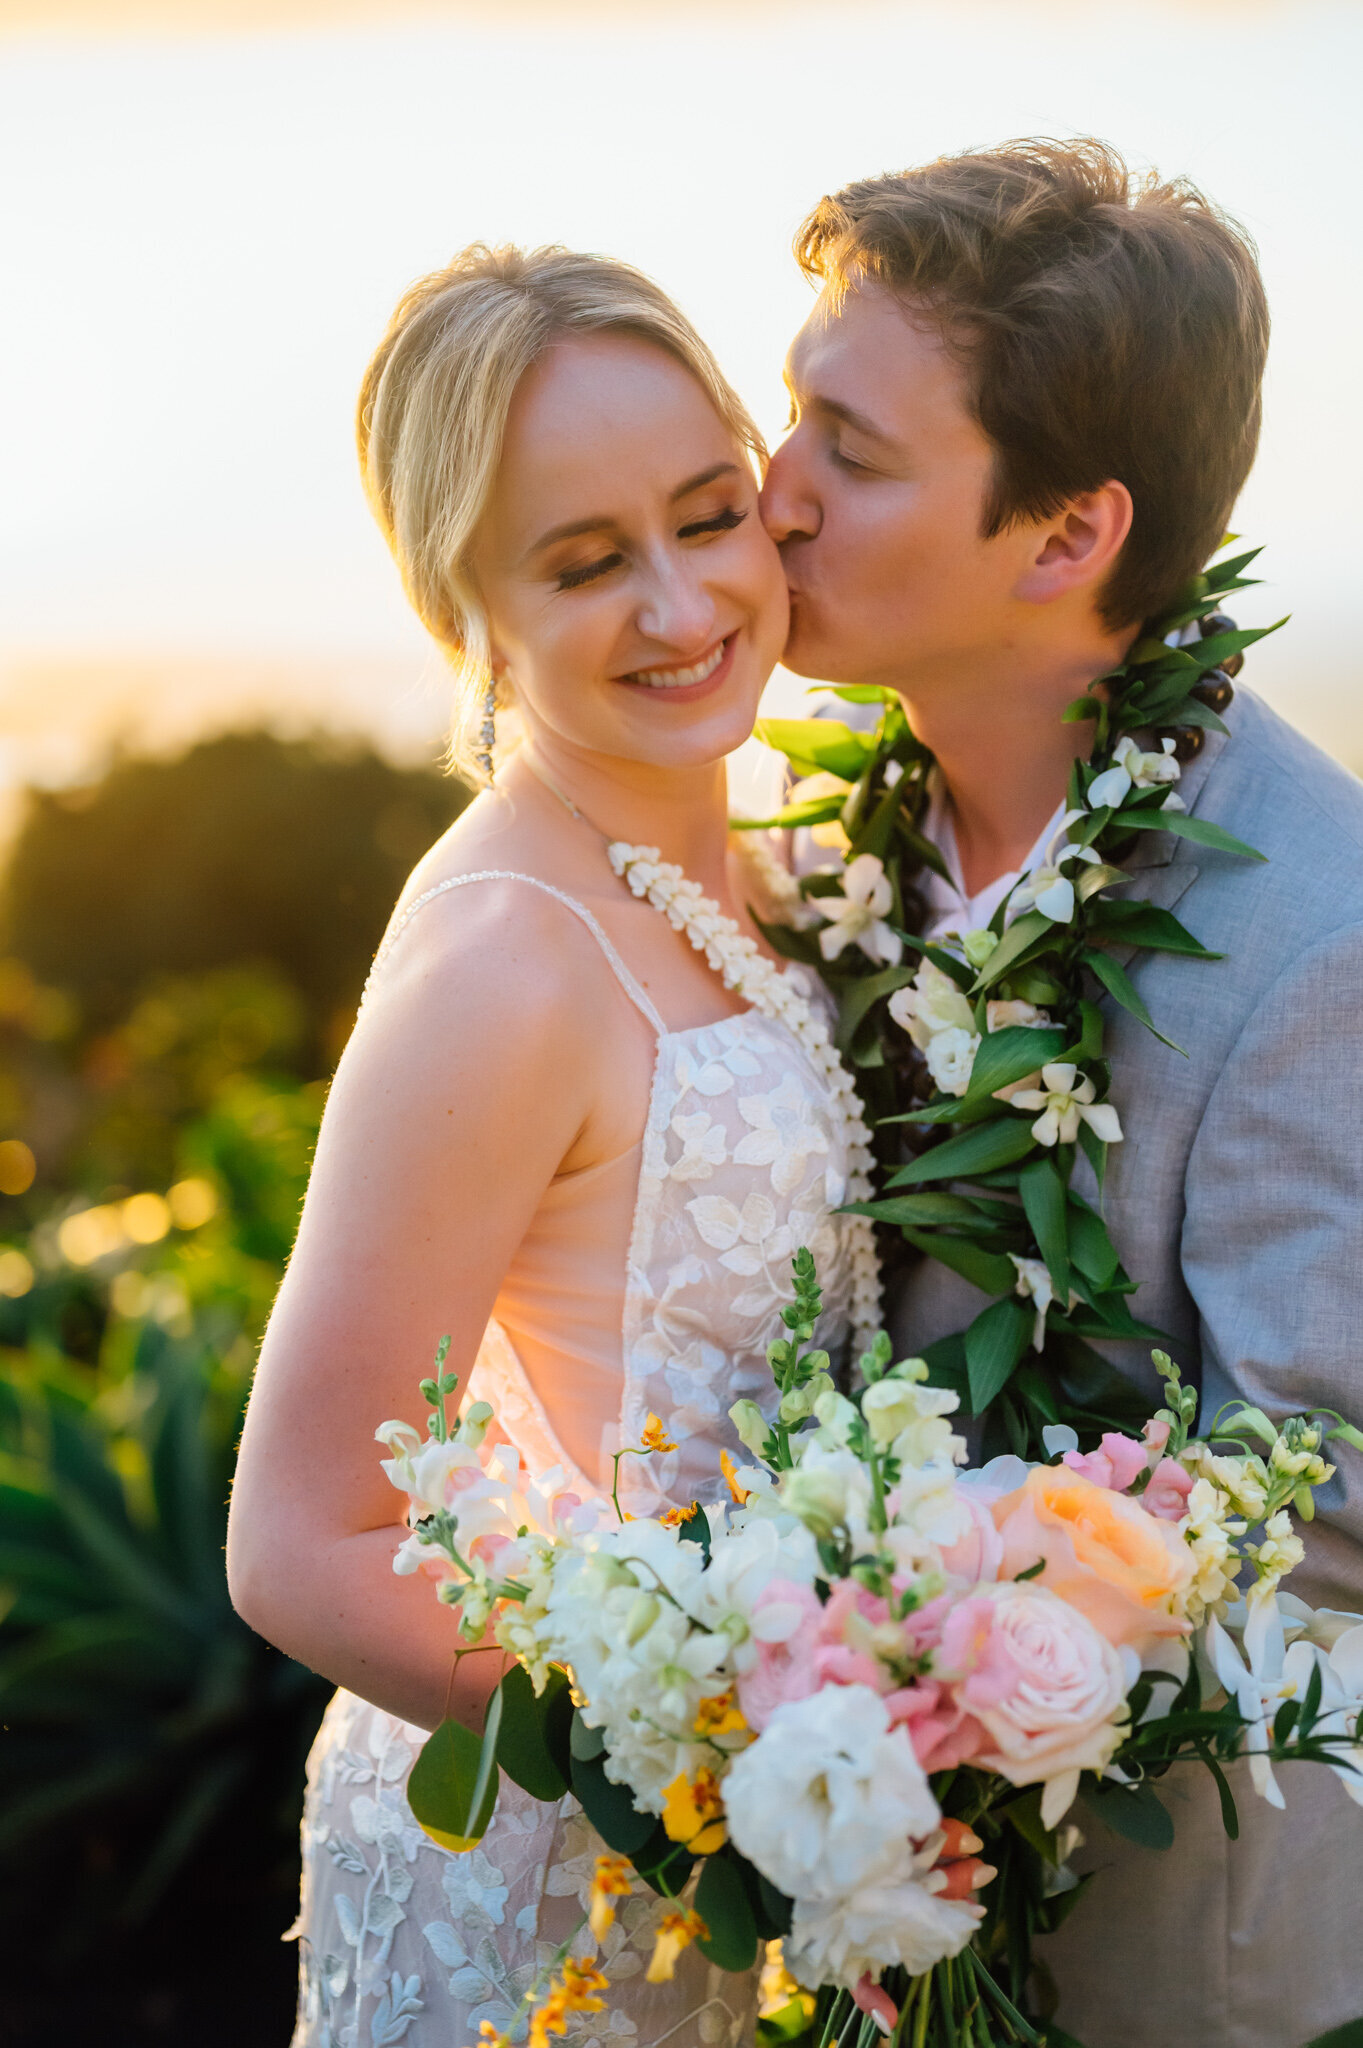 sunset glow while bride and groom kiss on their wedding day